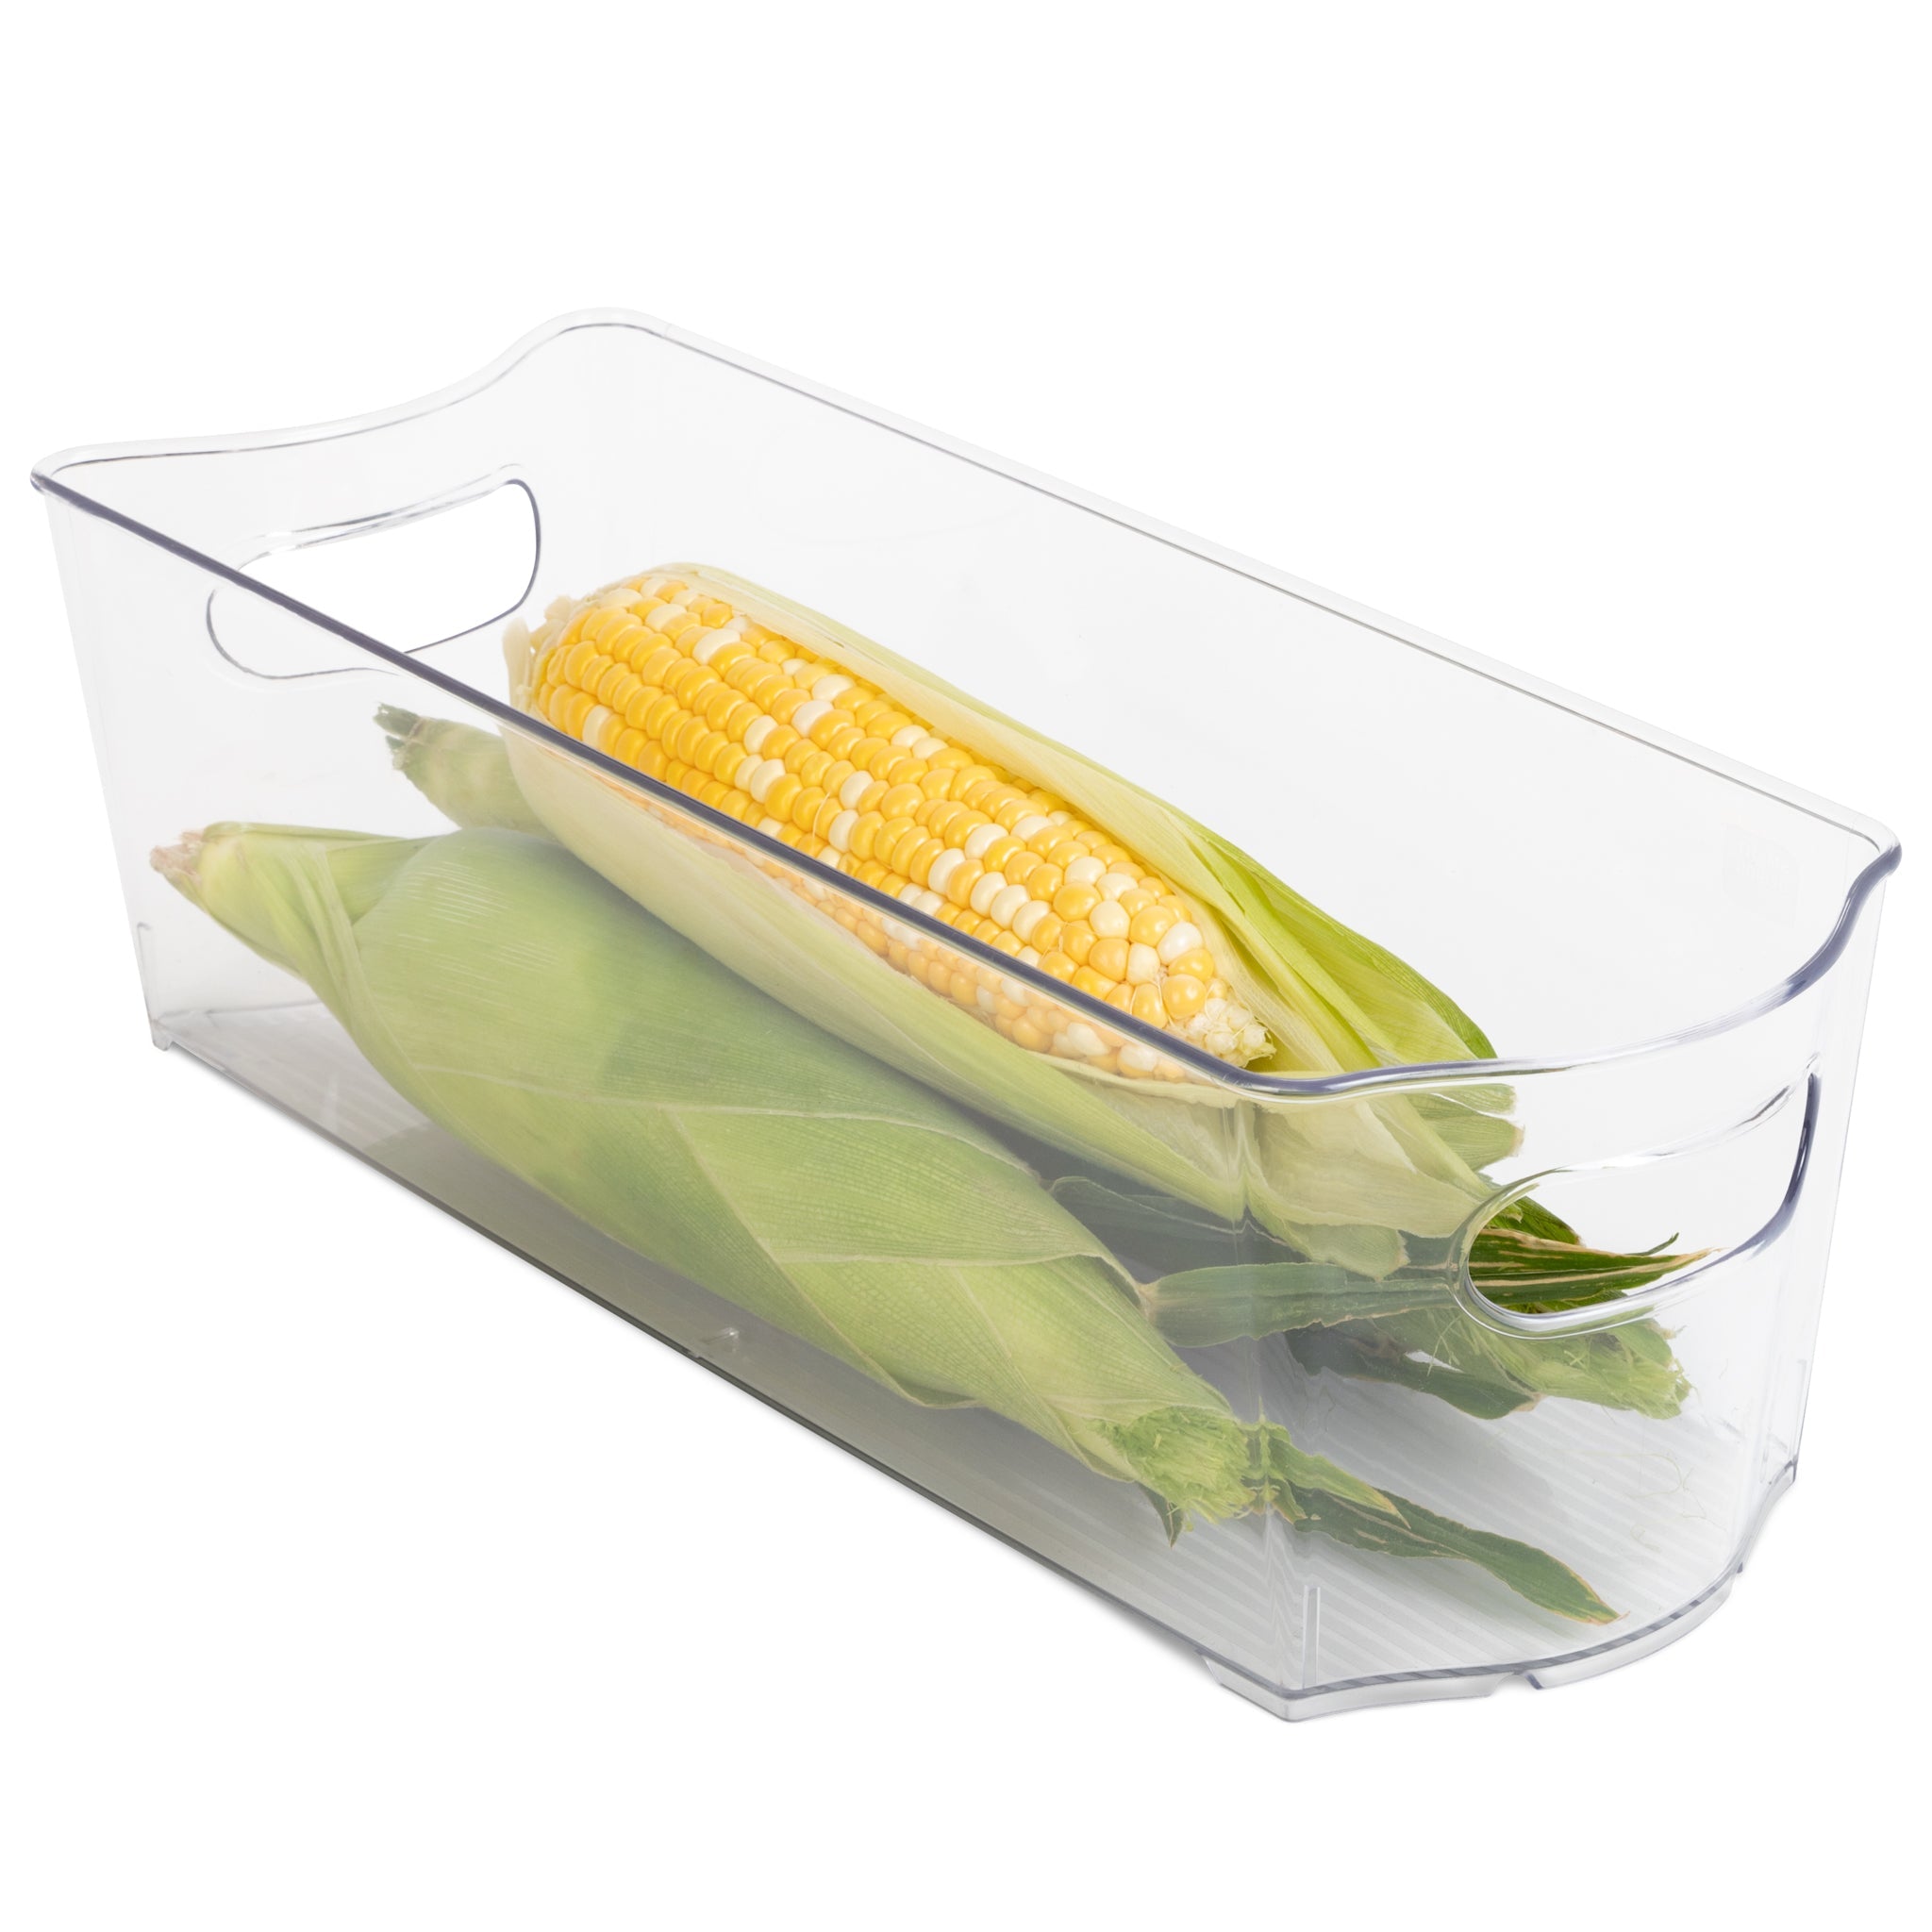 Stackable Clear Refrigerator Storage Bin with Handle - 8 pack - 6 x 16 inch - Smart Design® 2